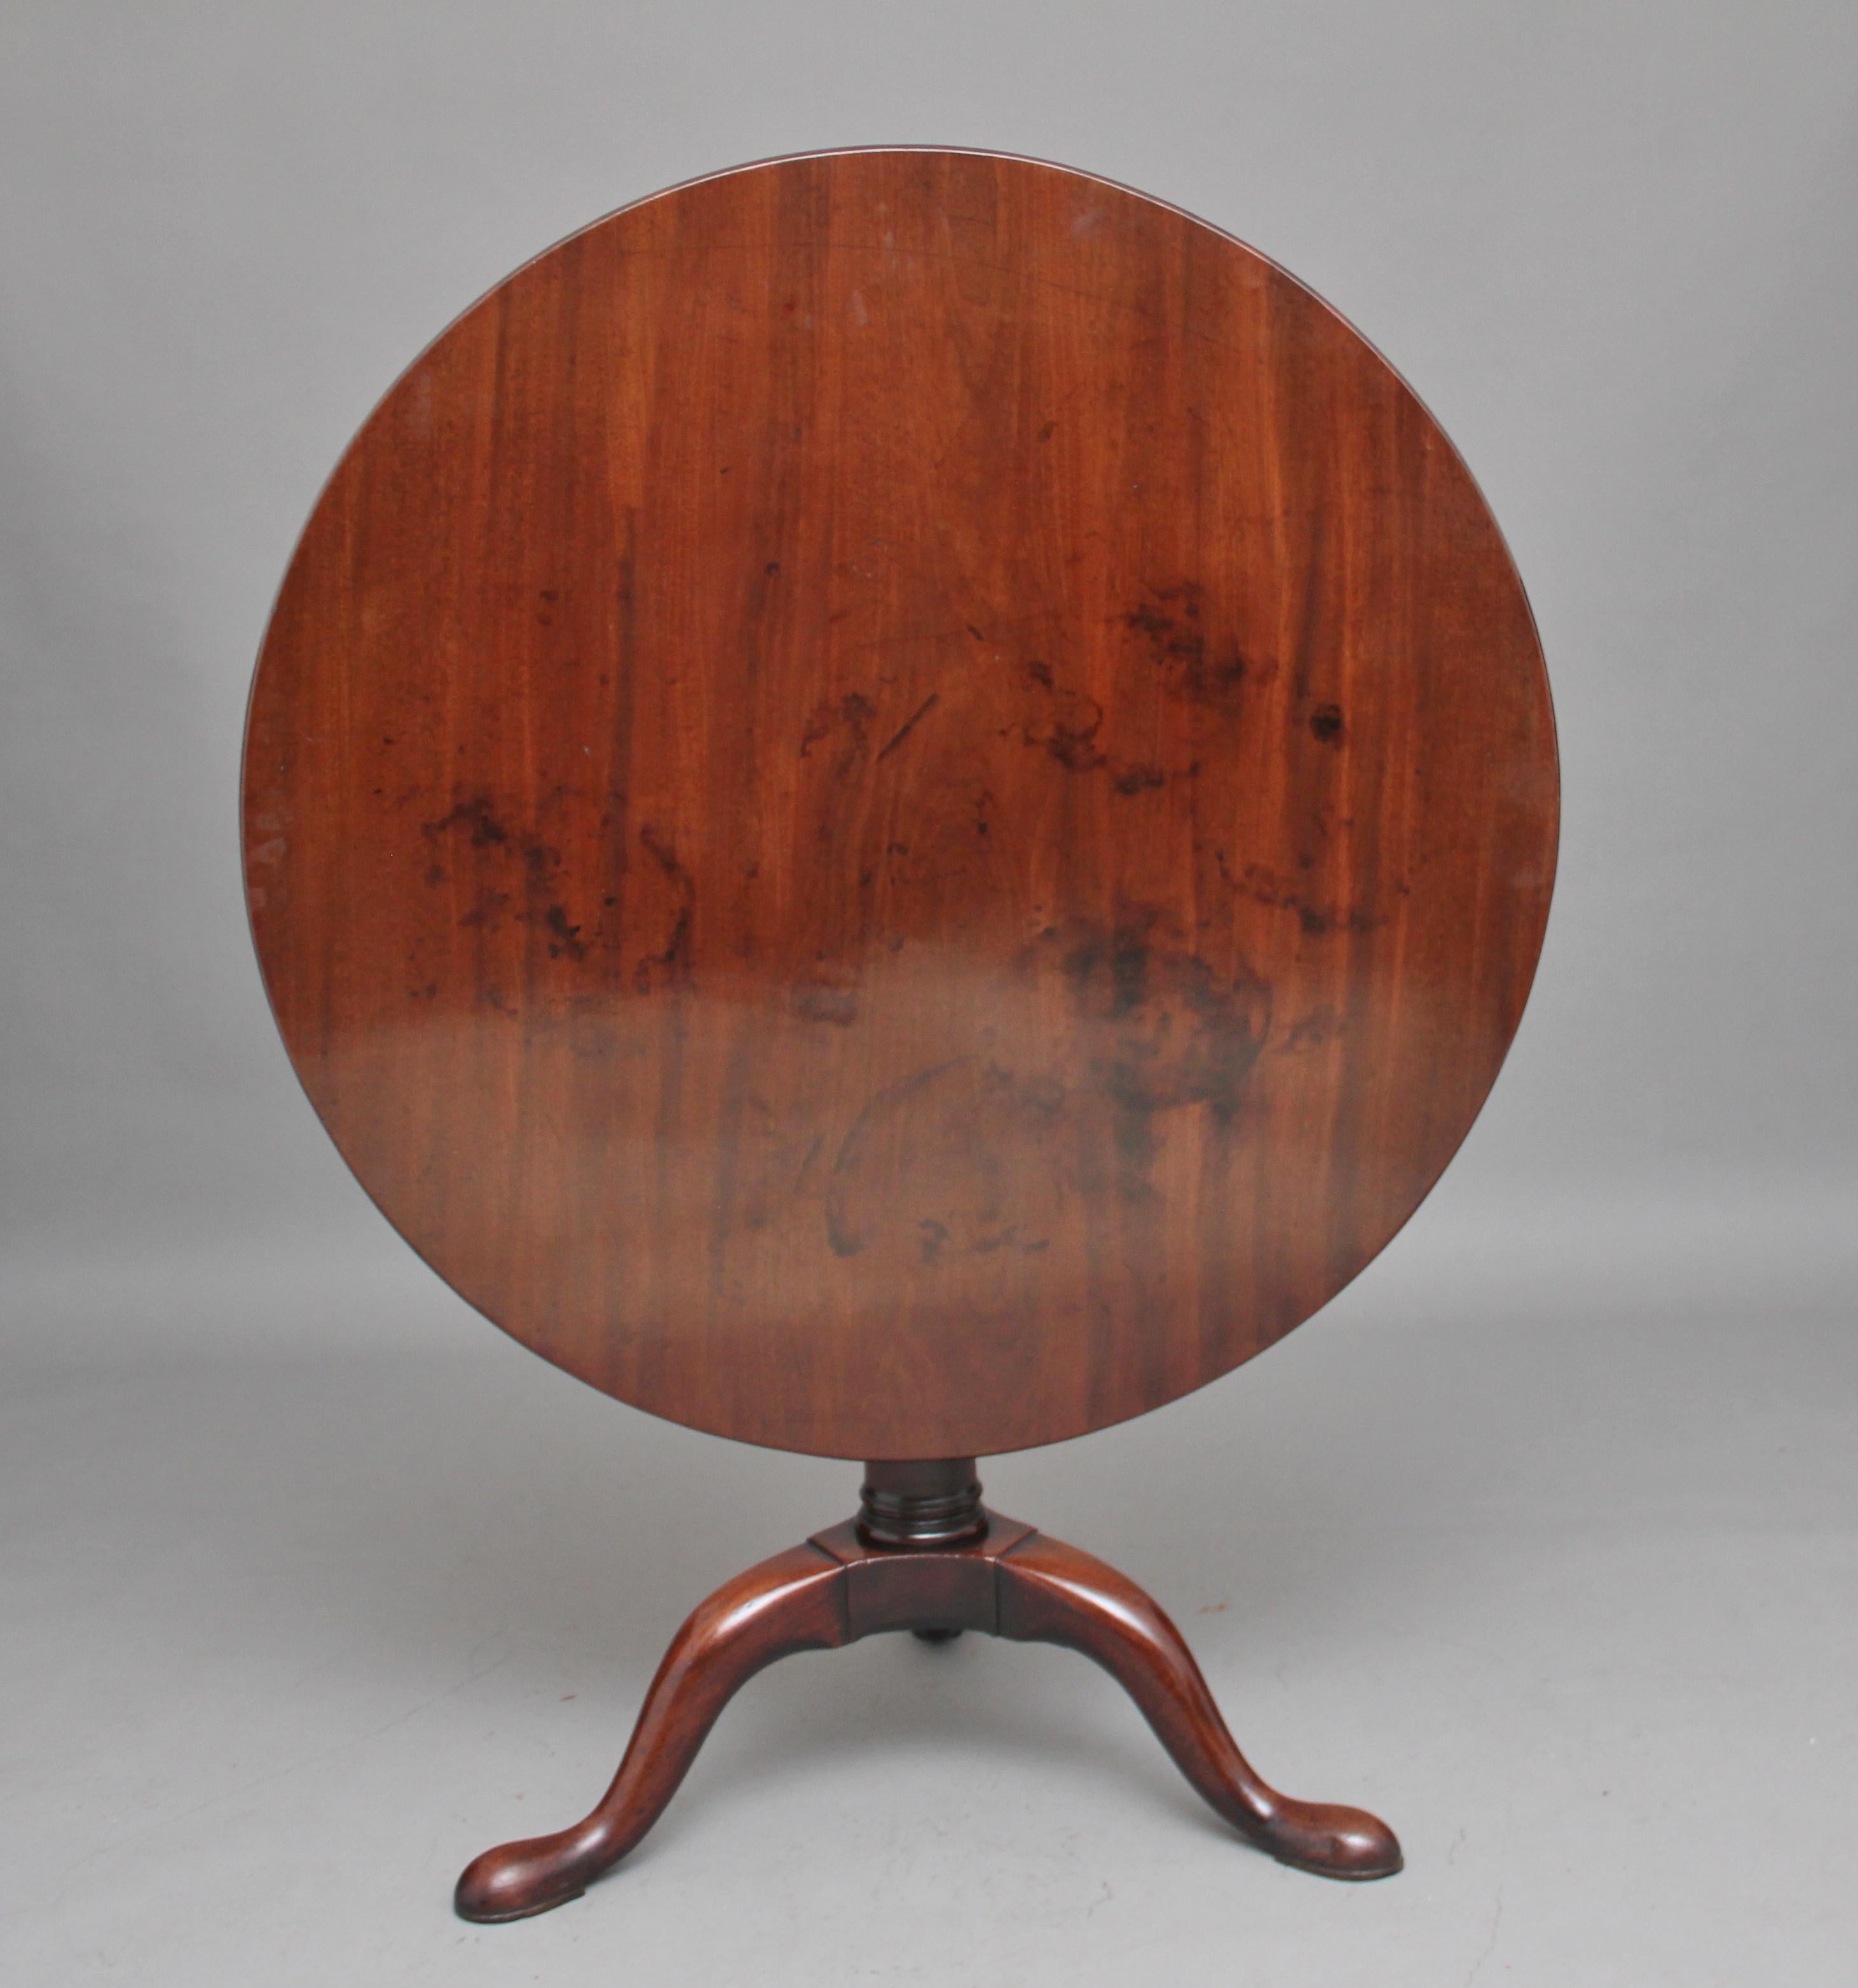 18th century mahogany tripod table of large proportions, the circular mahogany top sitting on a birdcage mount so you can turn the top without turning the base, supported on a turned column terminating with three slender shaped legs, circa 1780.
 